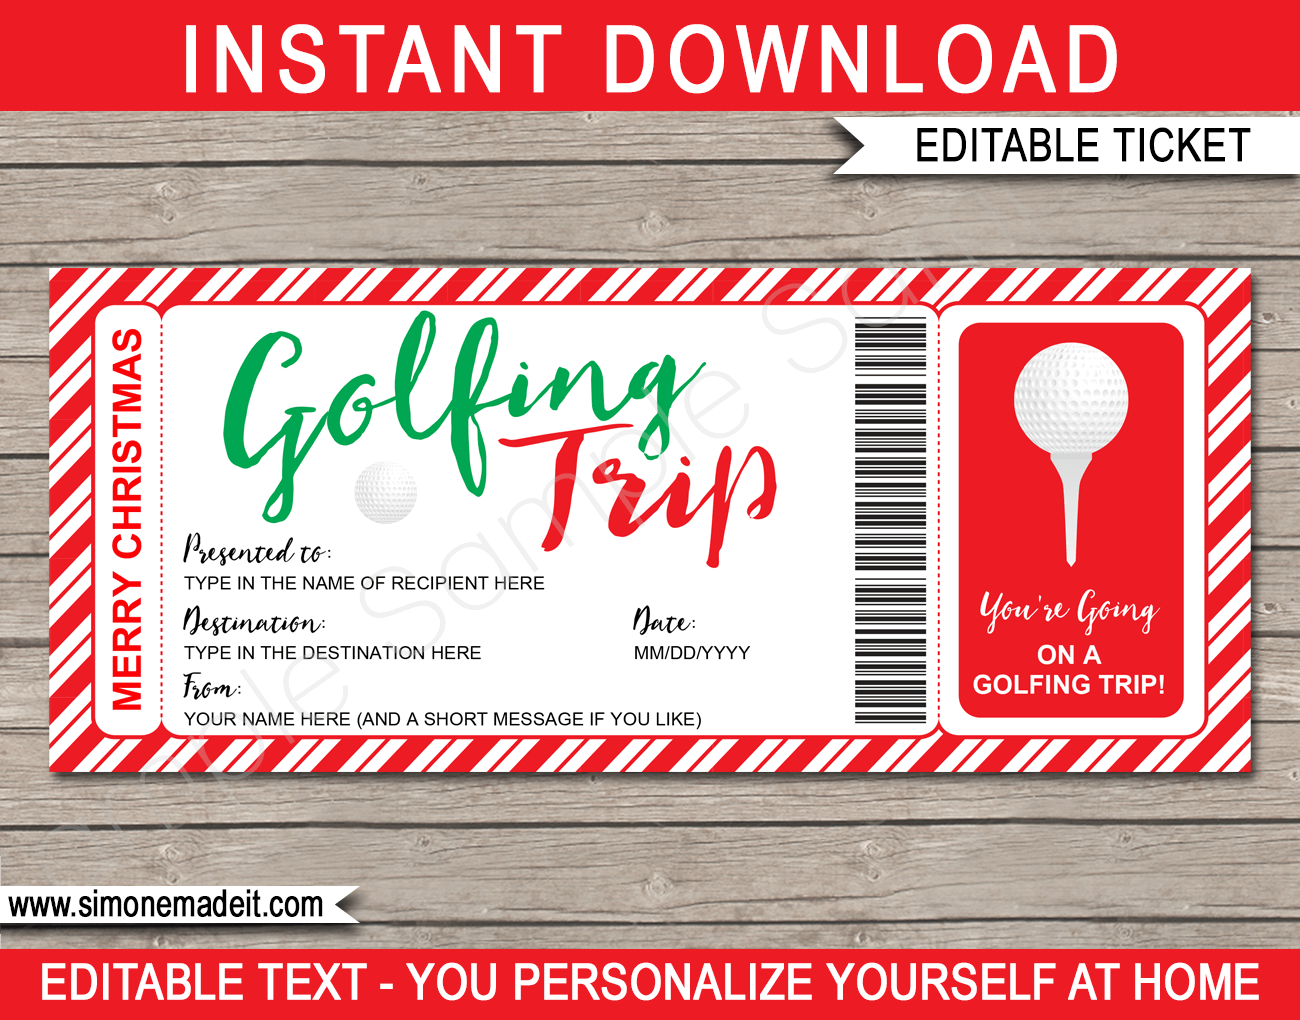 Christmas Golfing Trip Ticket Gift Voucher  Editable & Printable Throughout Golf Gift Certificate Template